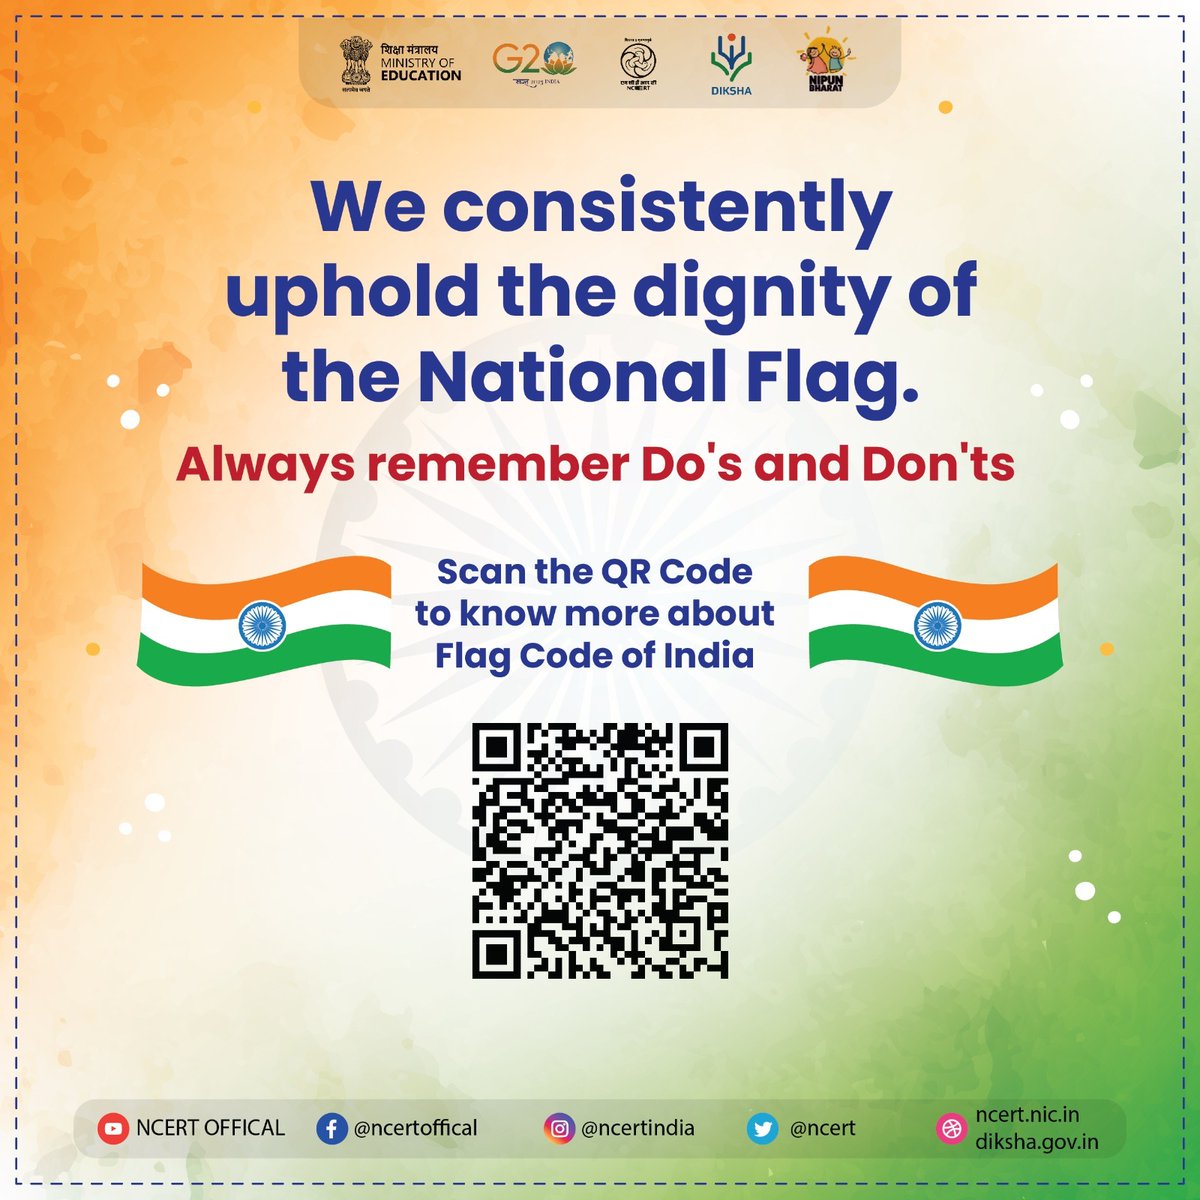 Wave our flag with pride and understand Do’s & Don’ts. To know more about the Flag code of India, Quickly Scan the QR Code. #AzadiKaAmritMahotsav #HarGharTiranga #SelfieWithTiranga #IndependenceDay2023 #NCERT #ministryofeducation @ProfSaklani @ssrivastava66 @ap_behera